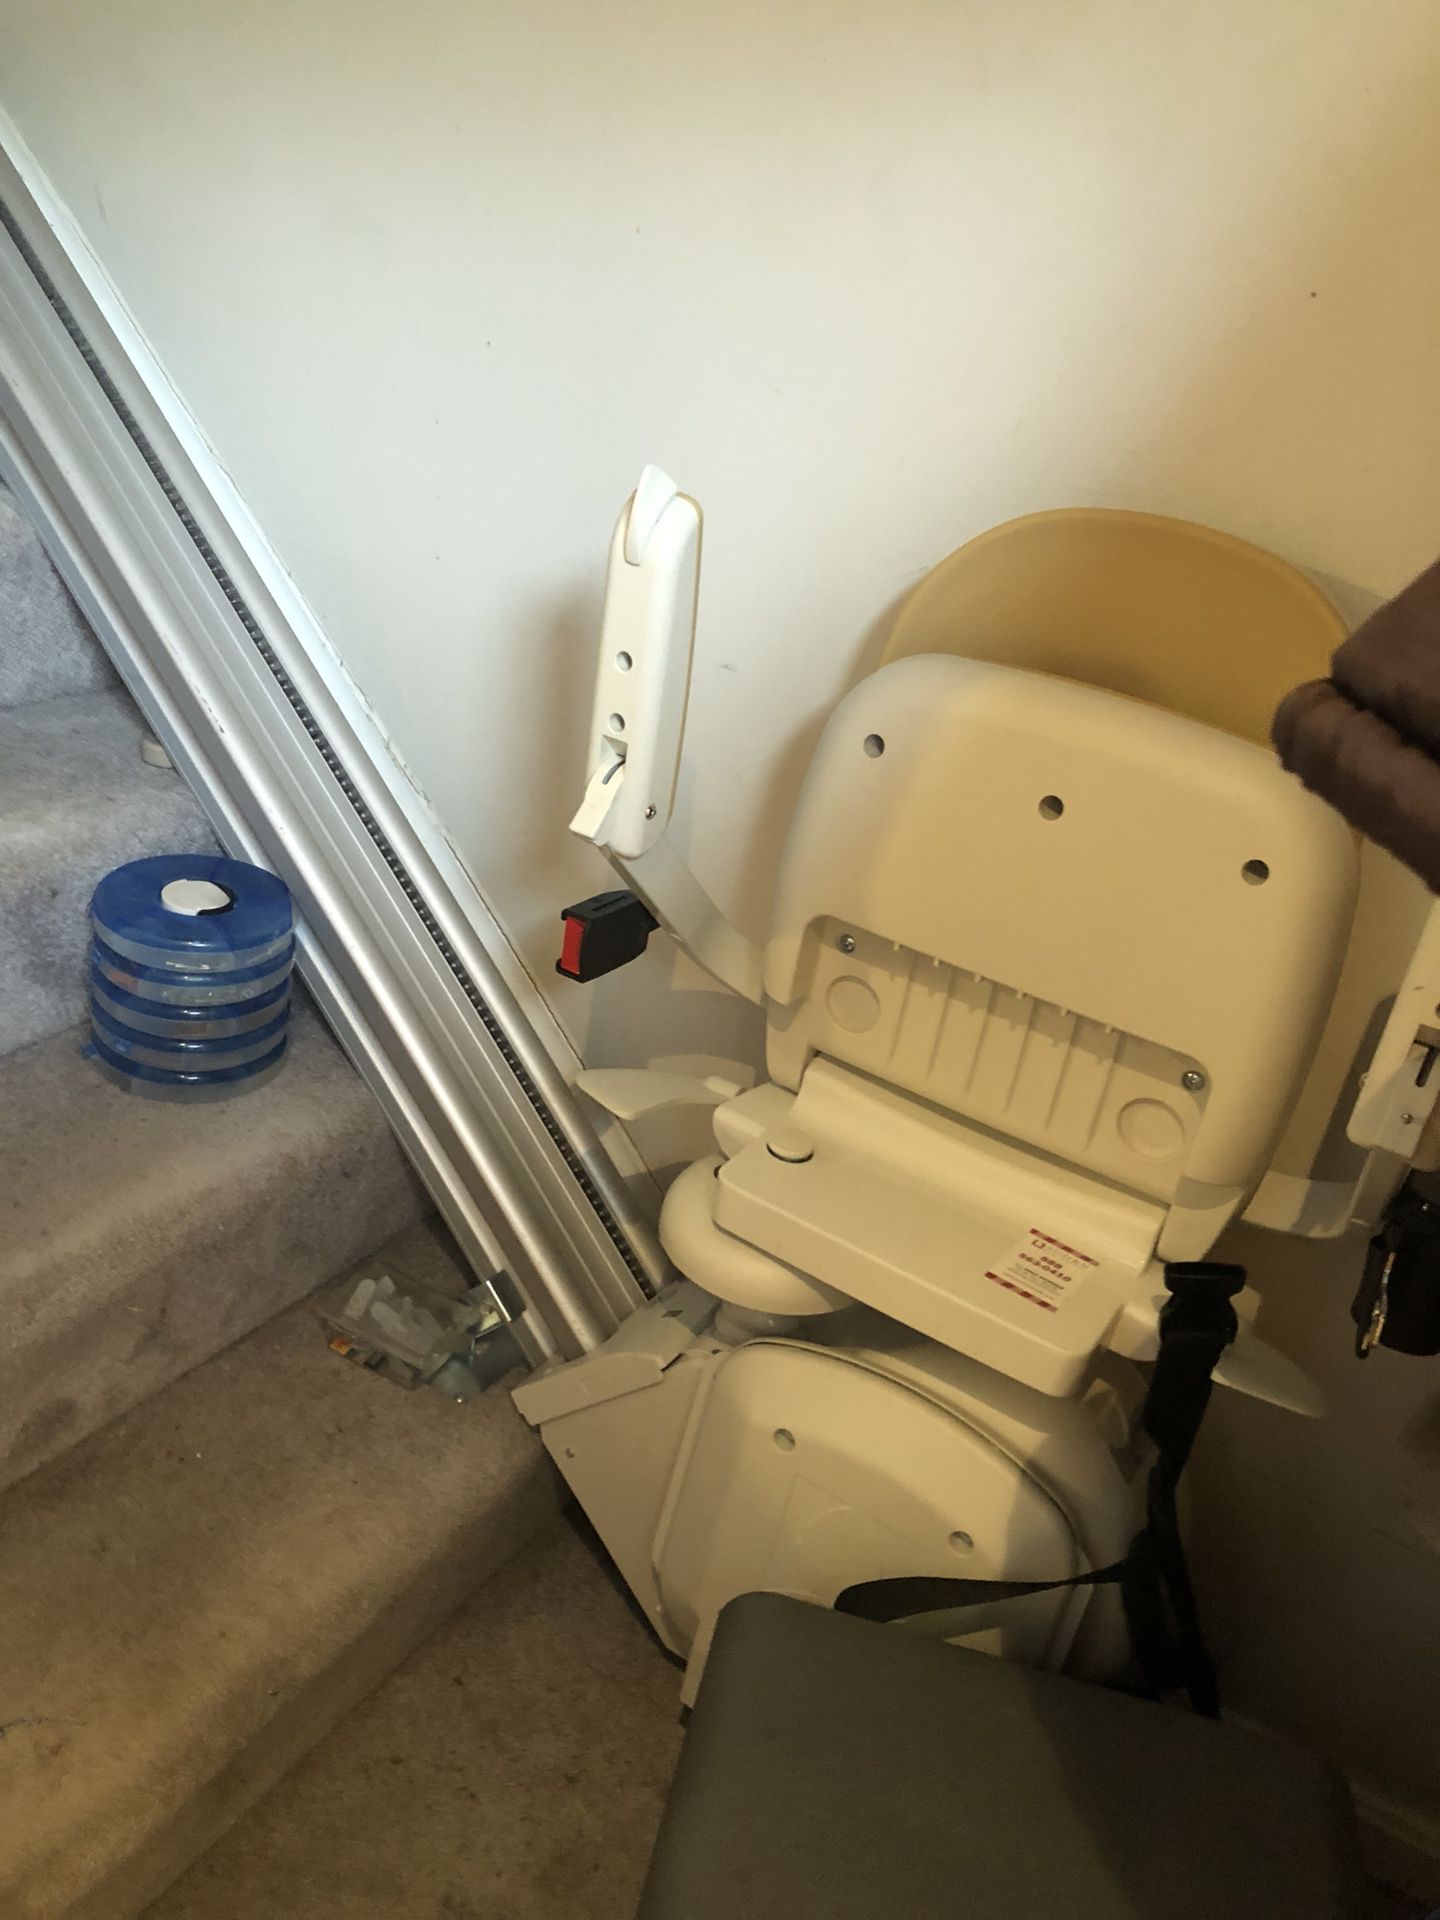 Stair lifts